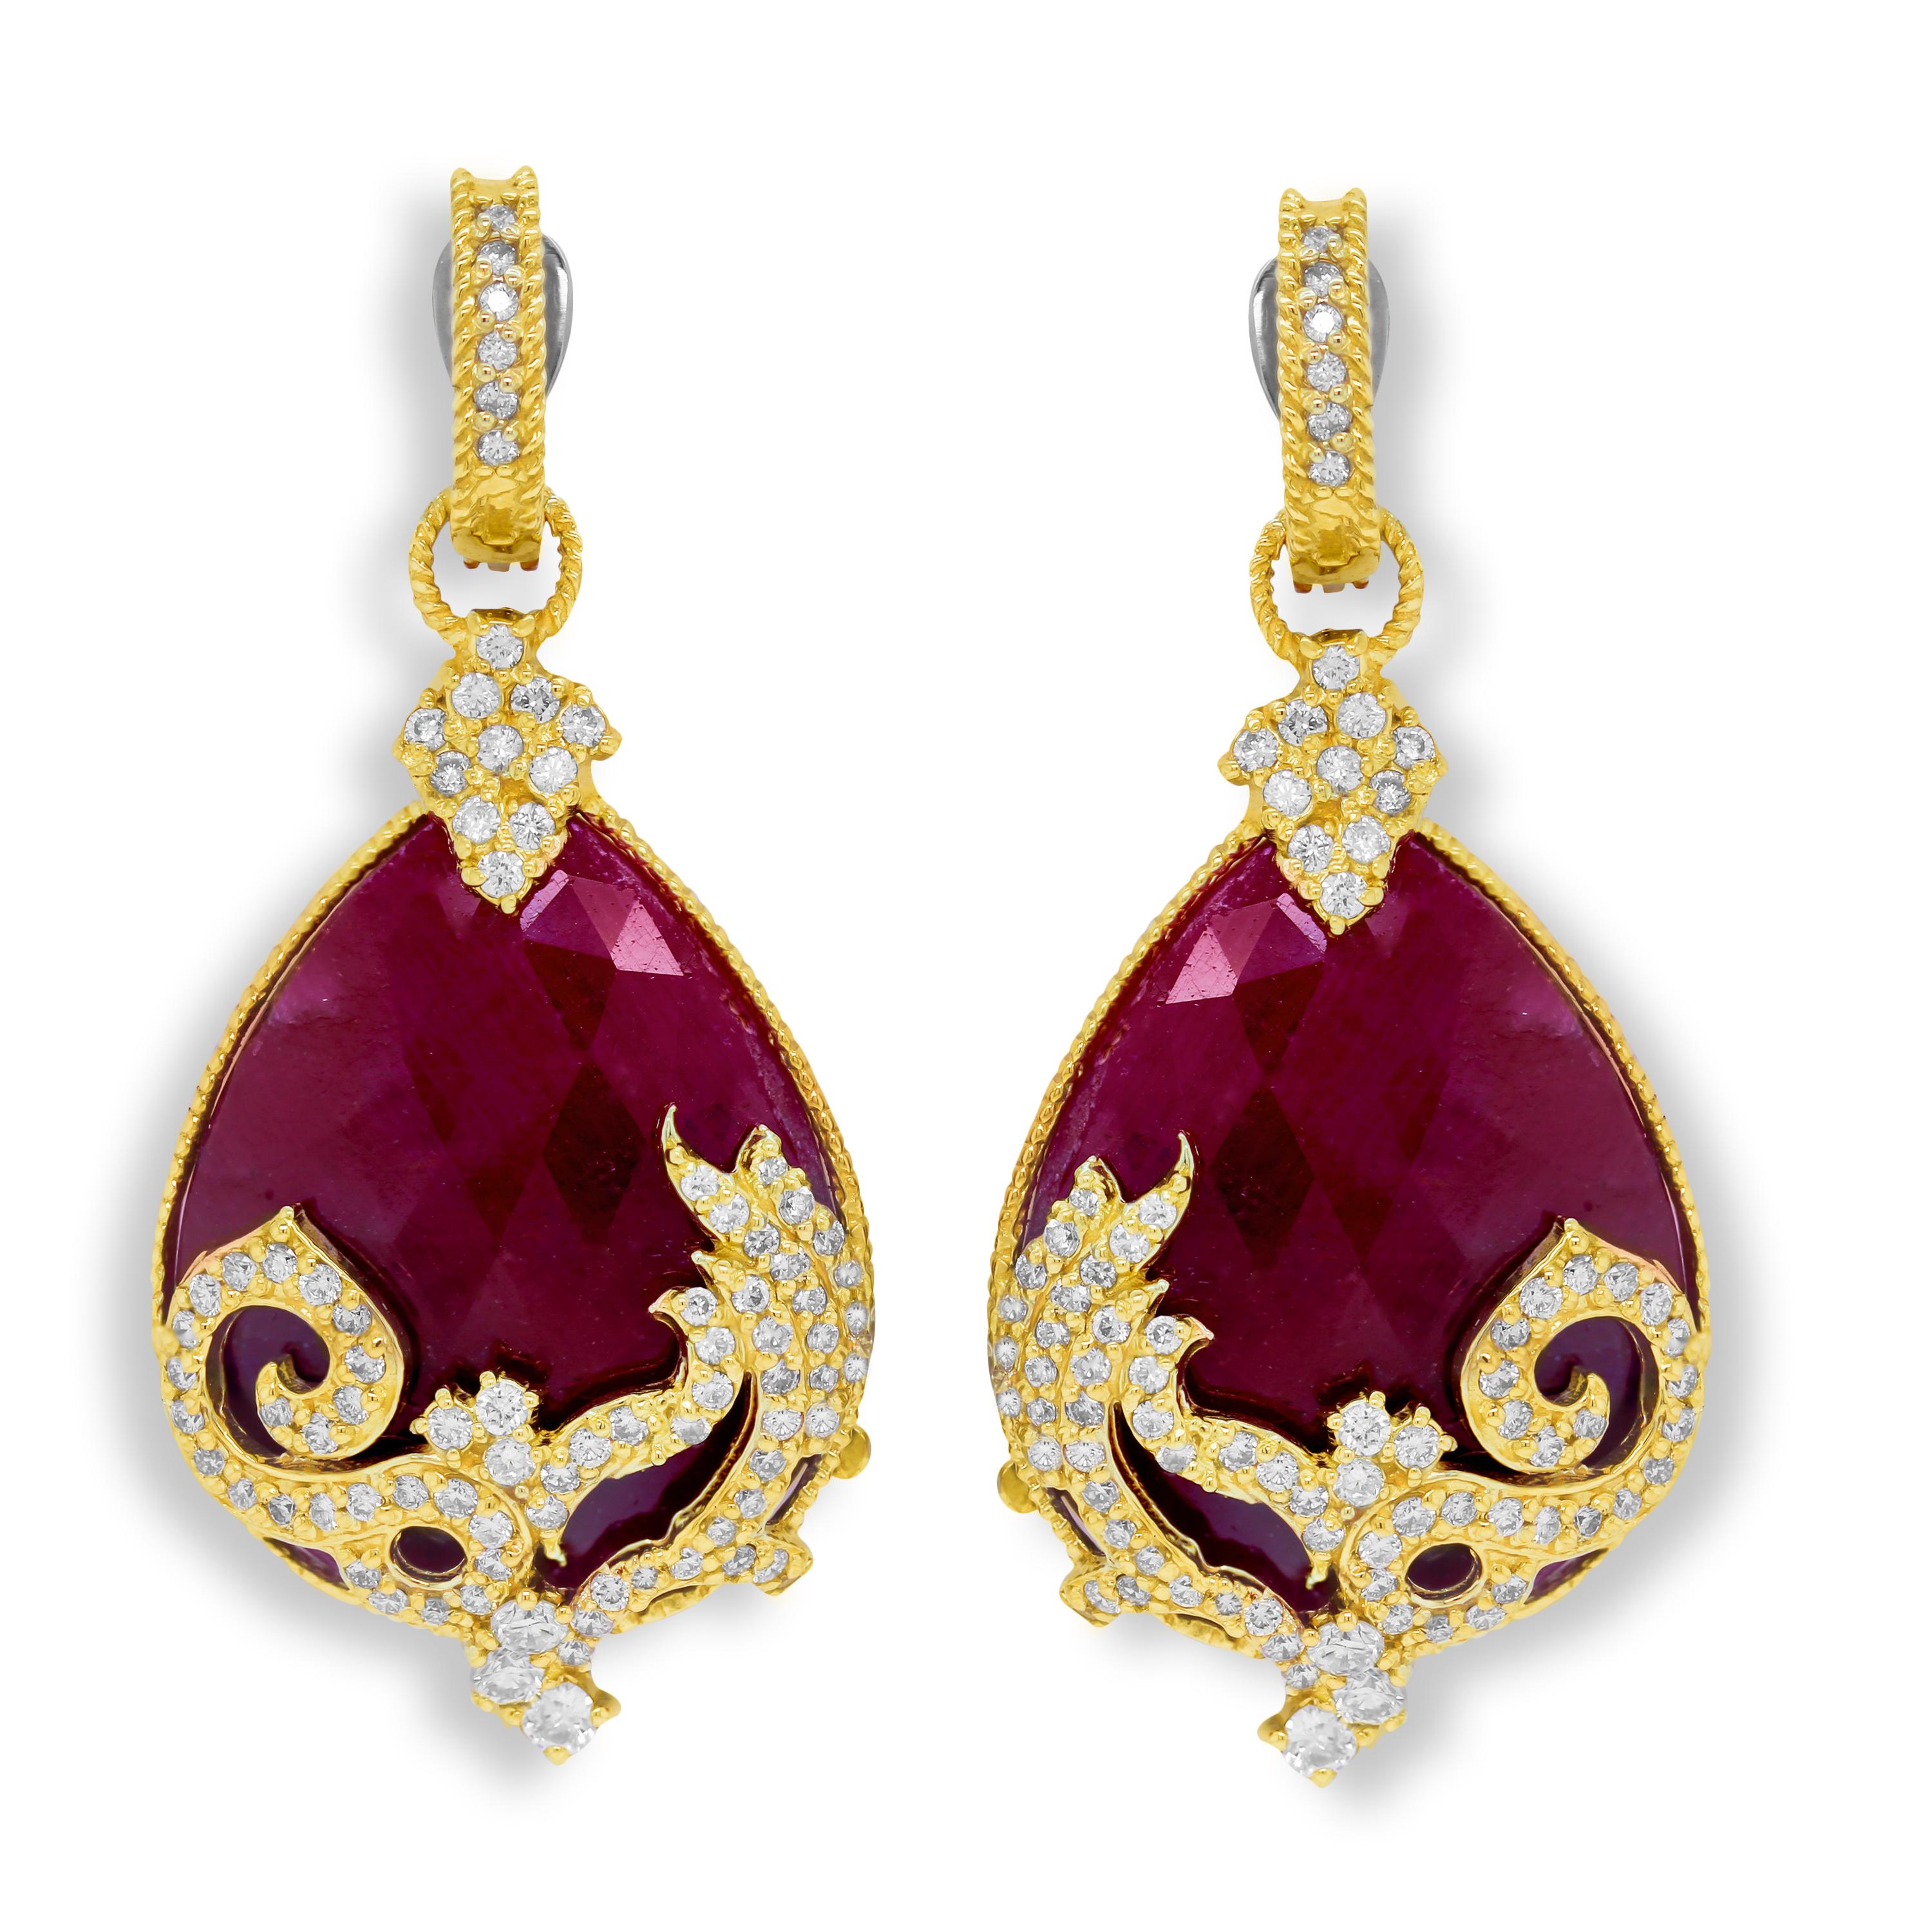 Contemporary Stambolian 18K Gold and Diamond Drop Dangle Earrings with Sliced Ruby